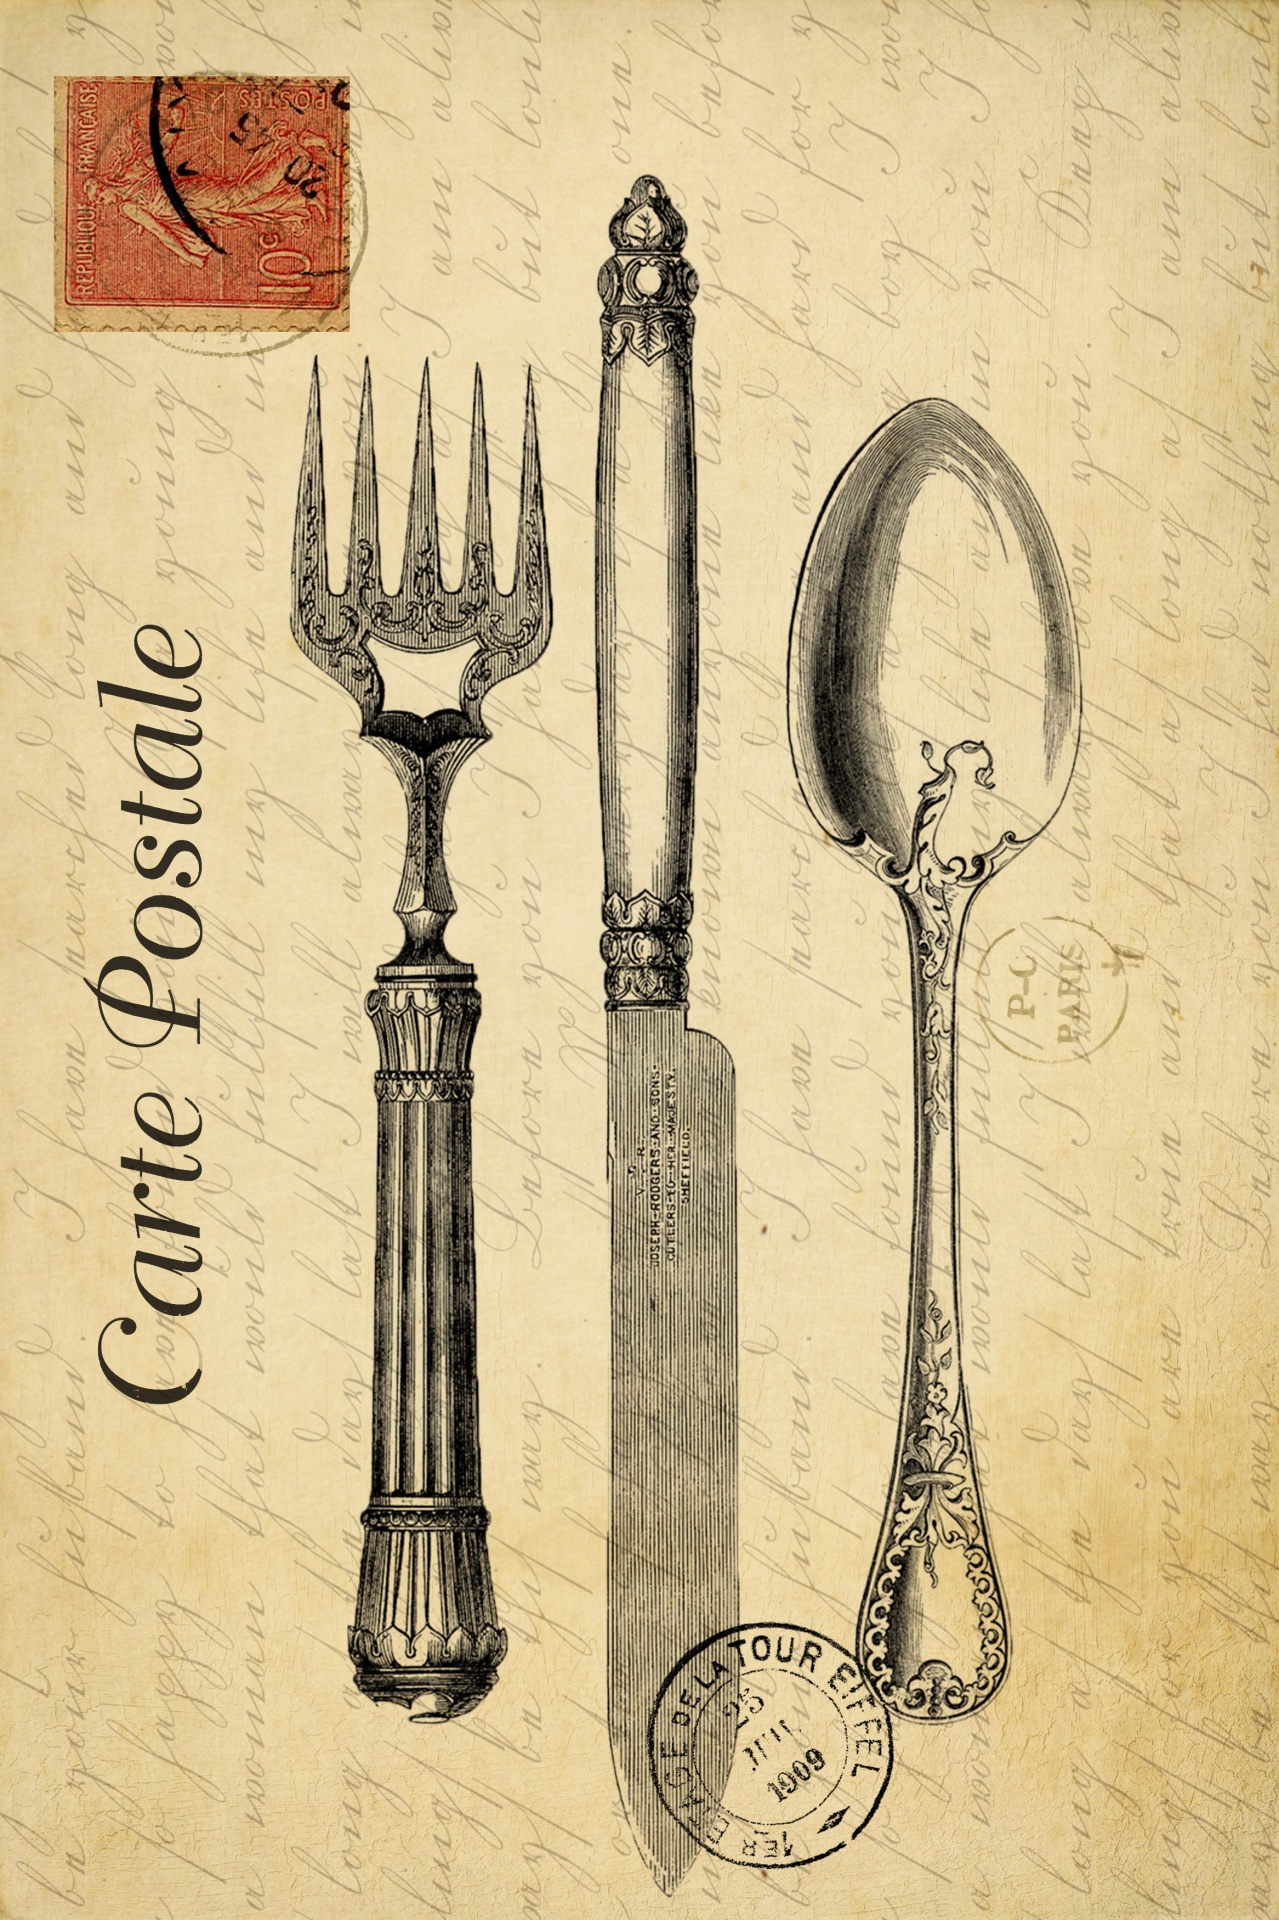 Vintage cutlery set on old French postcard